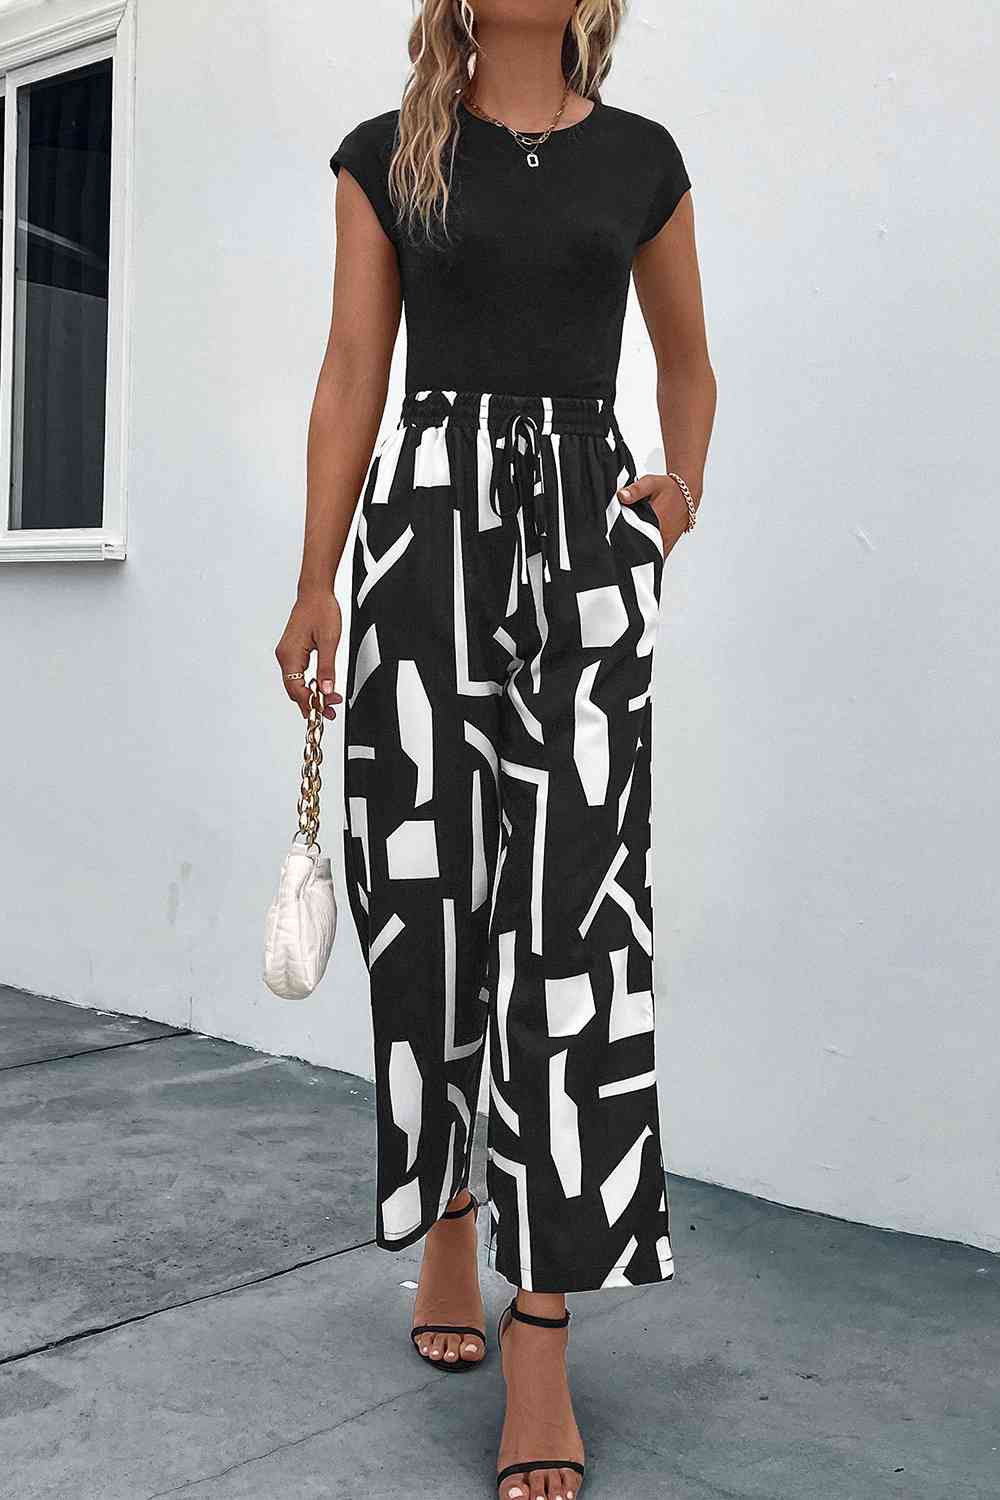 Blakey ~ Printed Straight Leg Pants with Pockets - DEAL OF THE DAY!